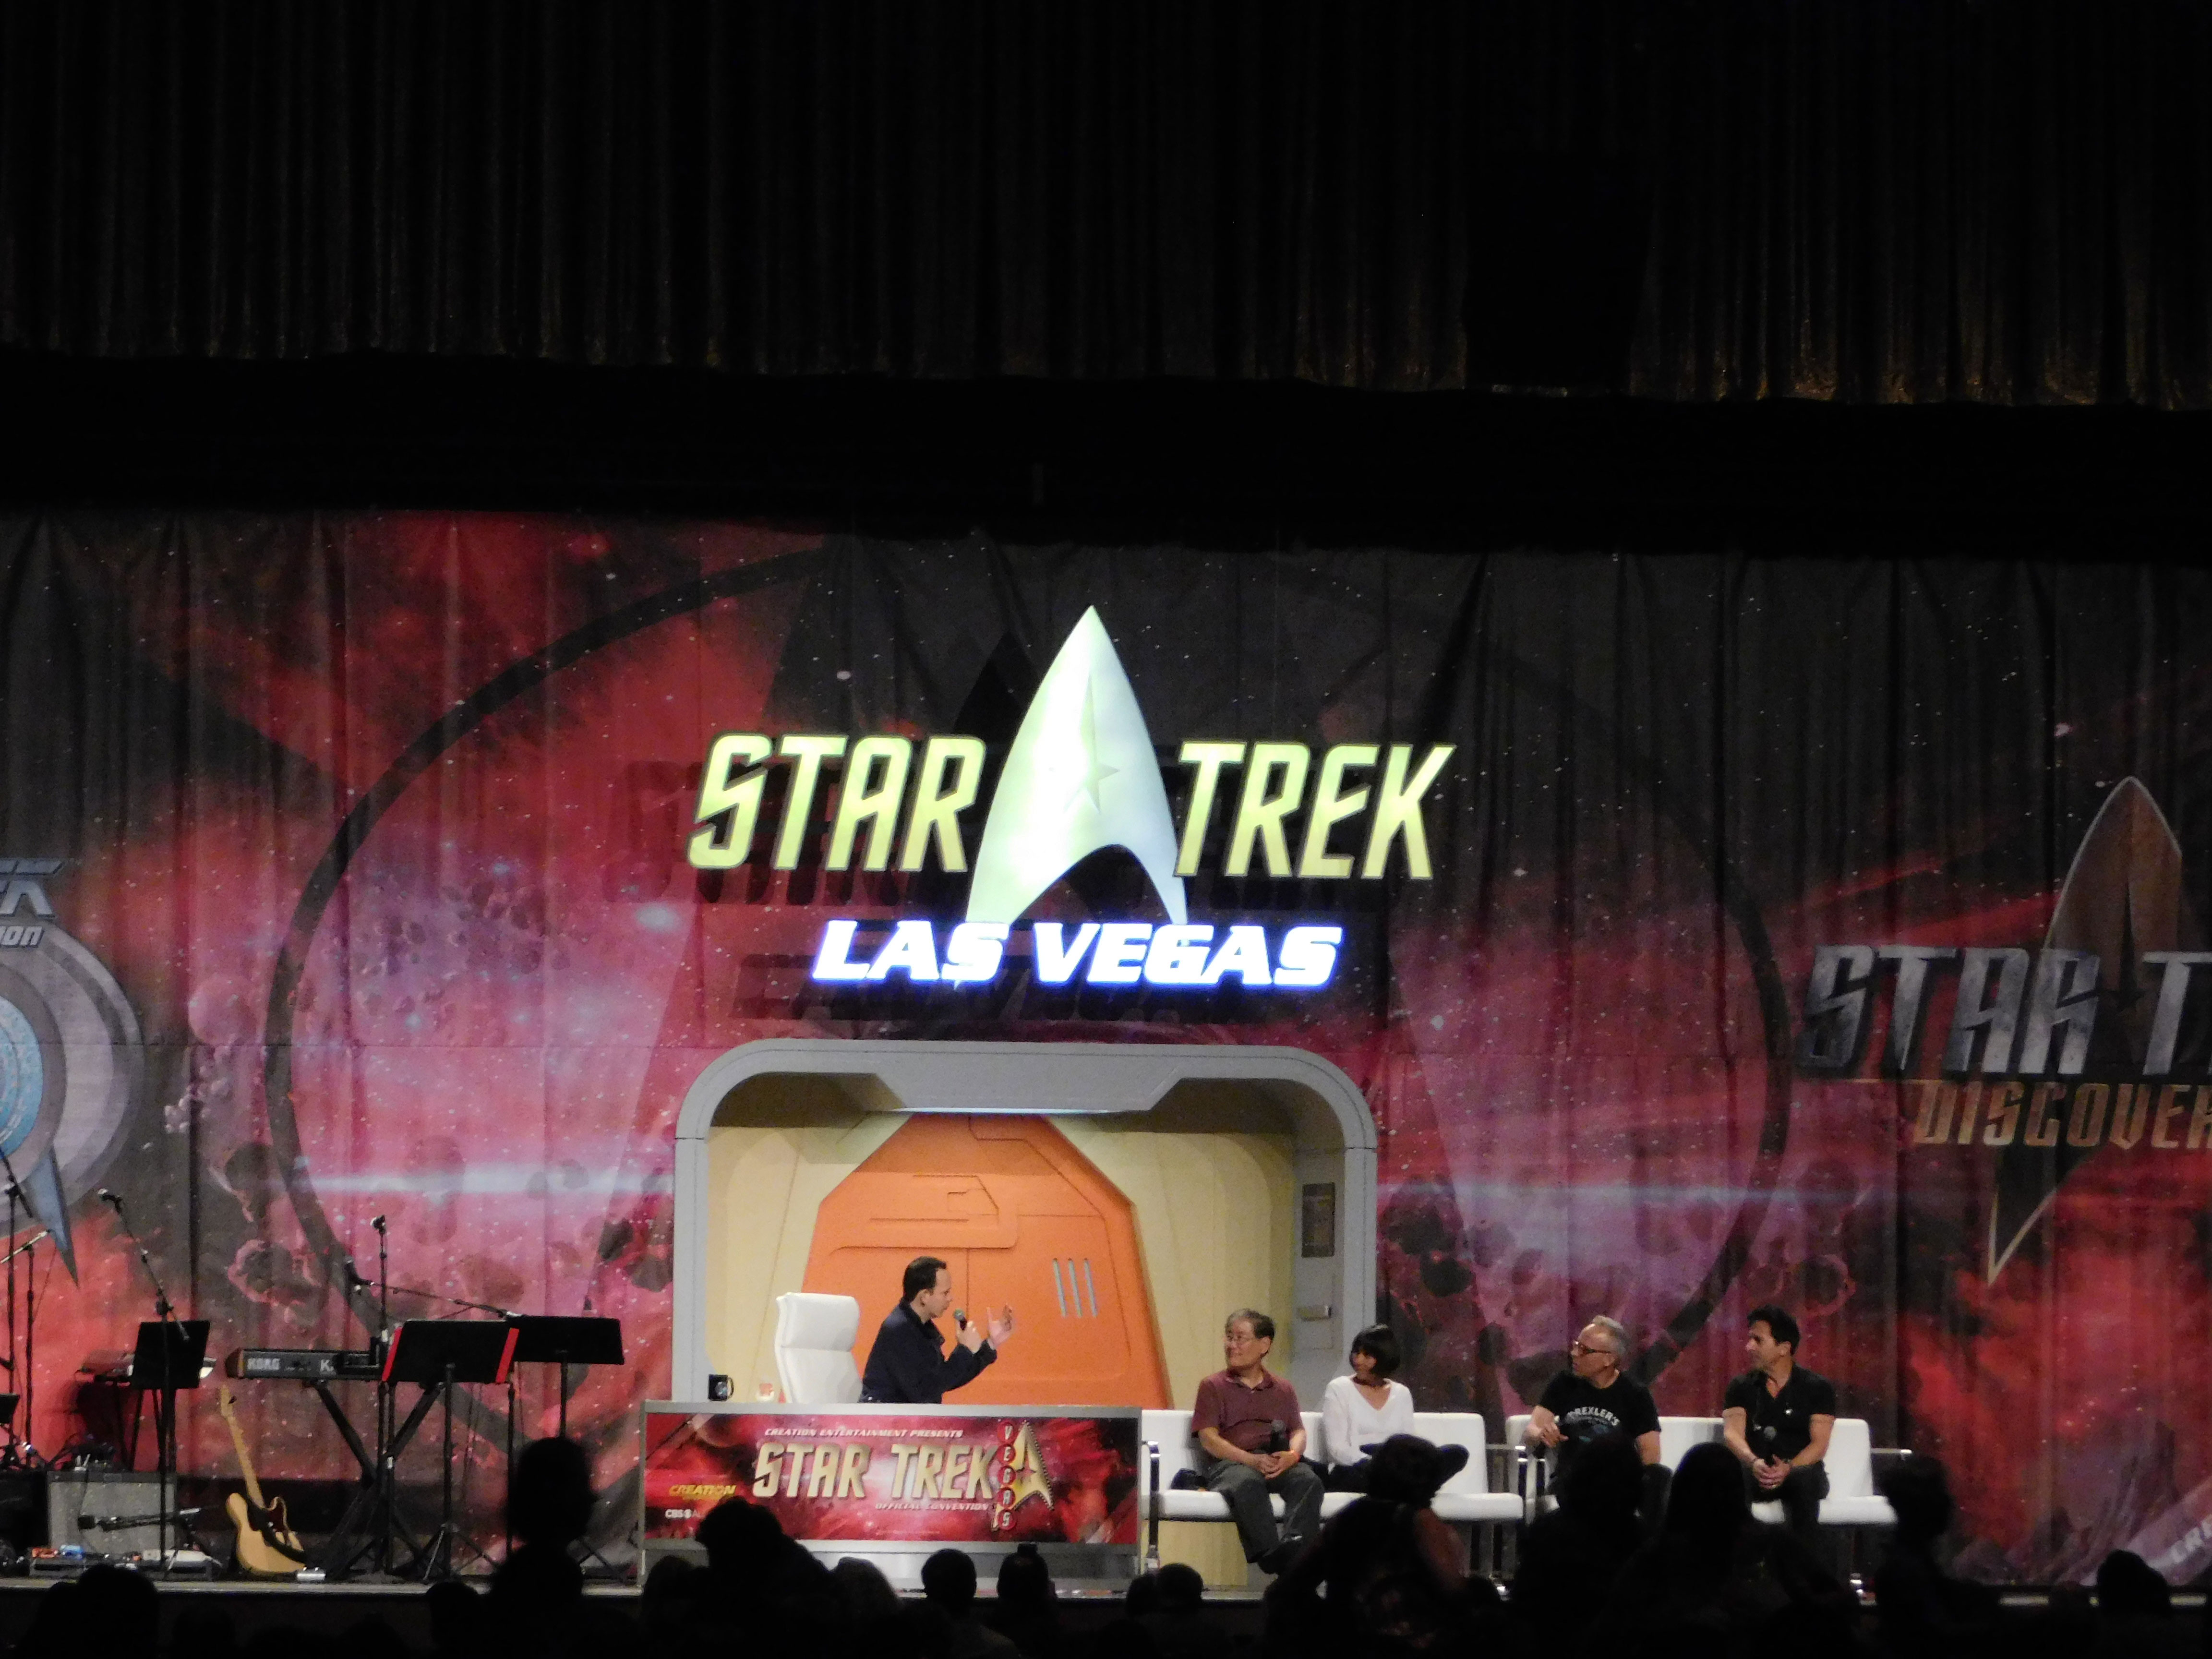 The Official Star Trek Convention Las Vegas 2017 Making New Discoveries